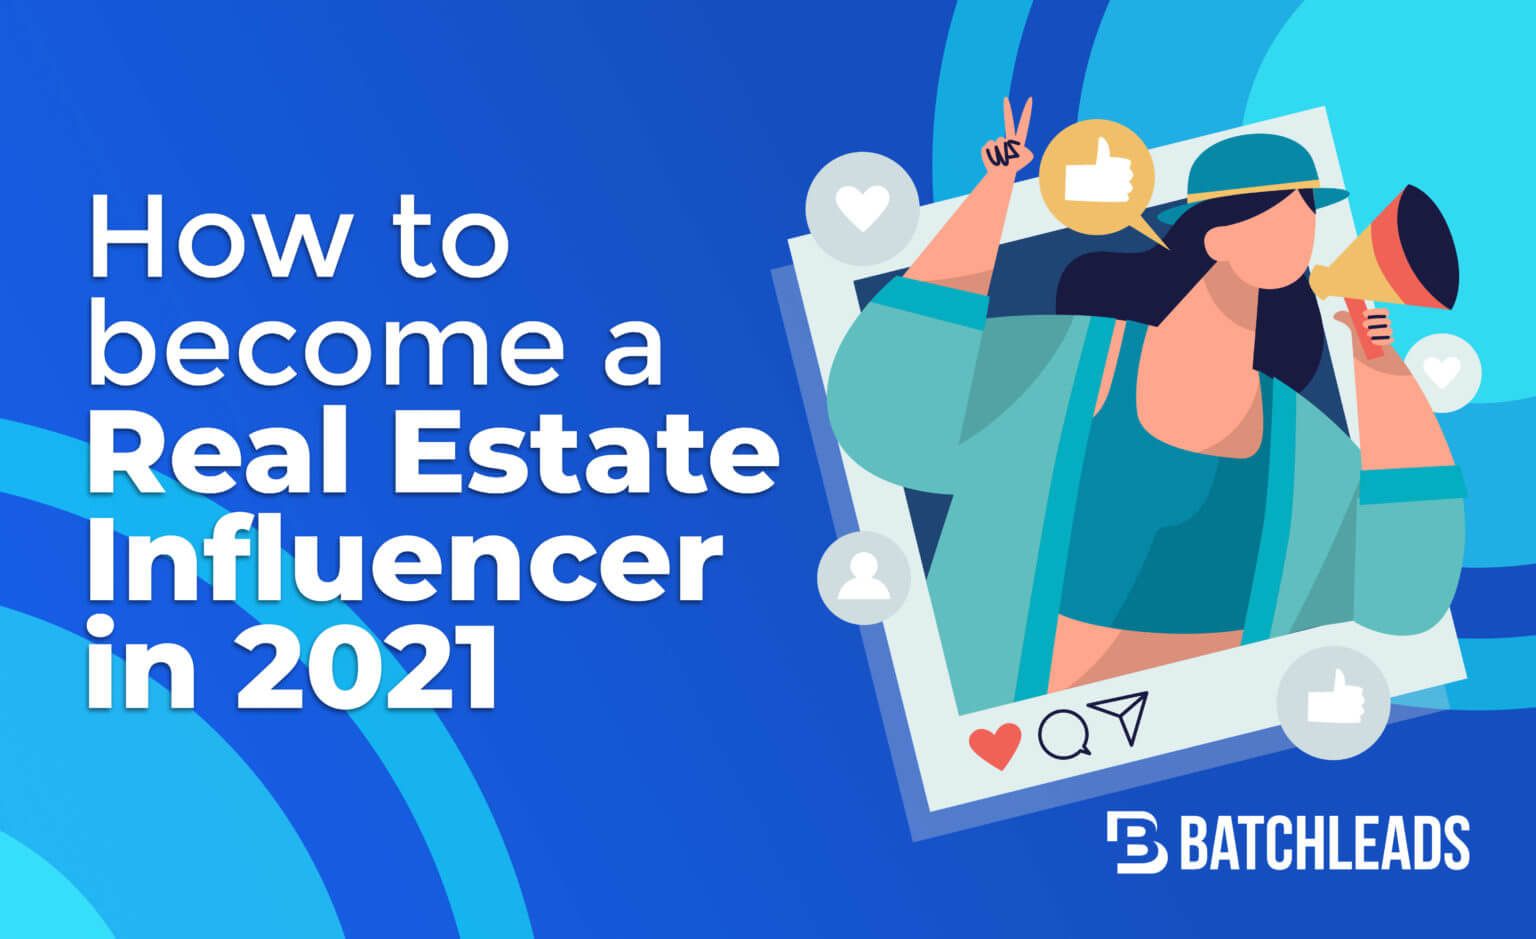 How To Become a Real Estate Influencer in 2021